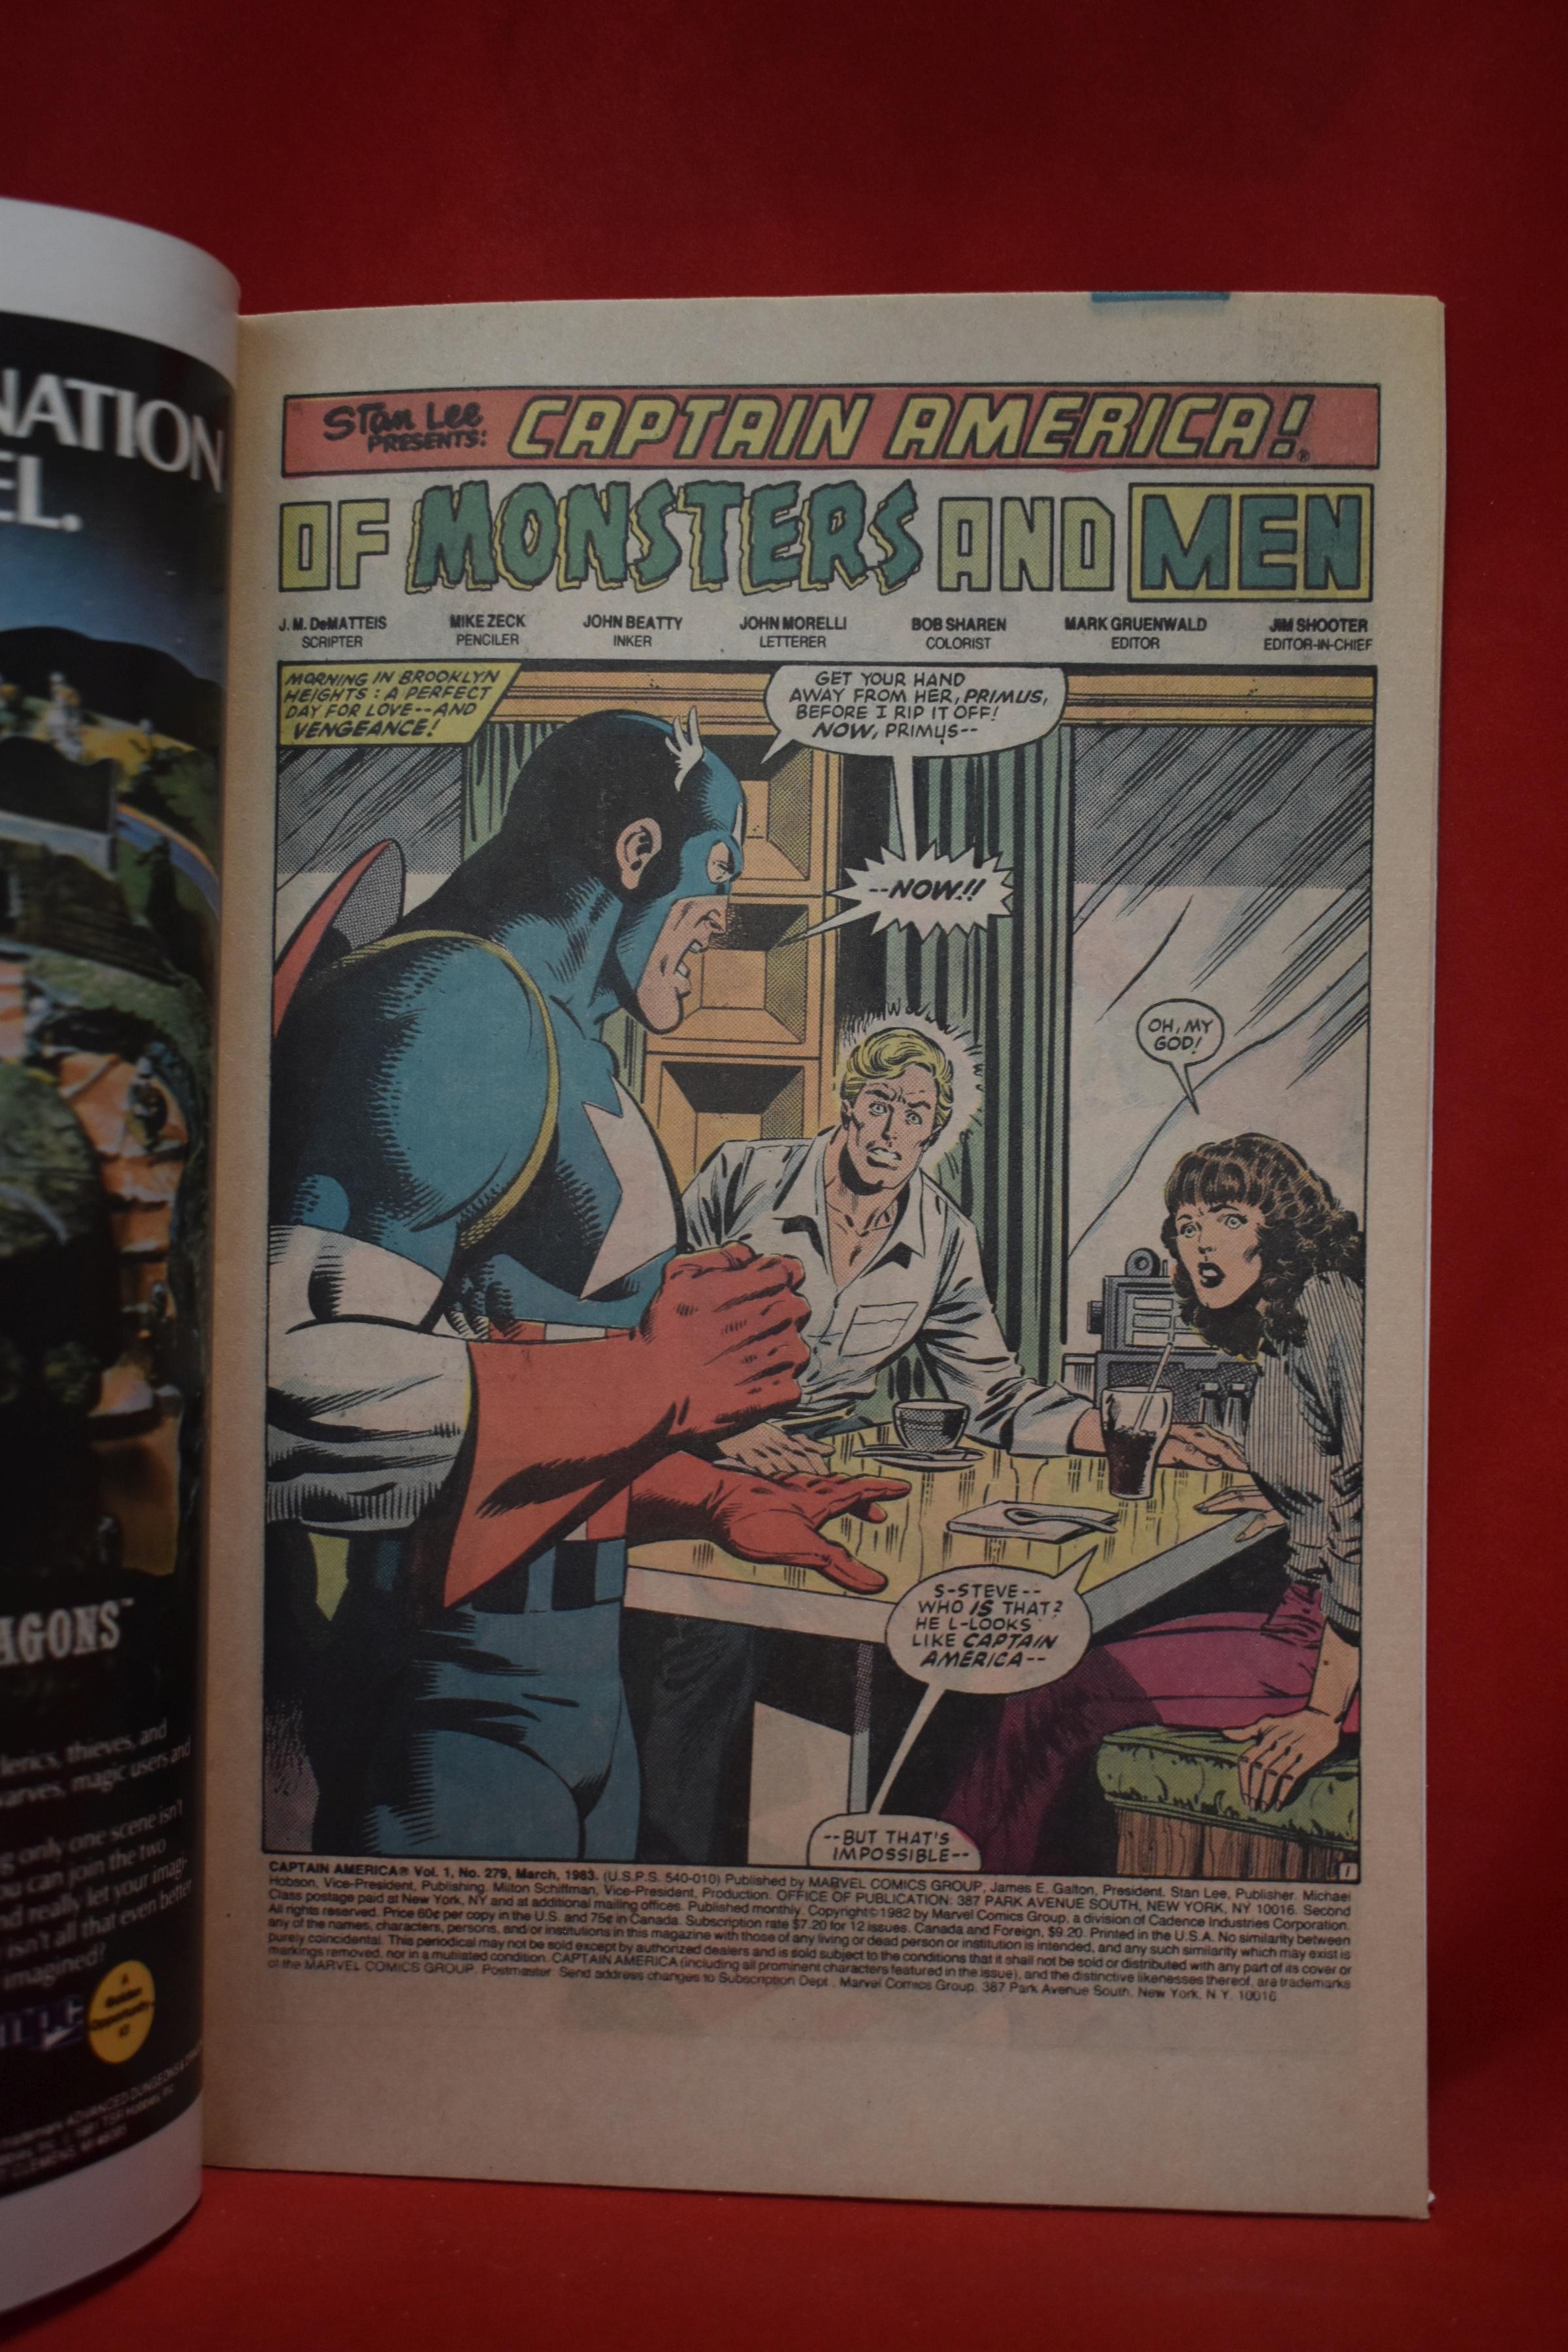 CAPTAIN AMERICA #279 | PRIMUS - OF MONSTERS AND MEN! | MIKE ZECK - NEWSSTAND